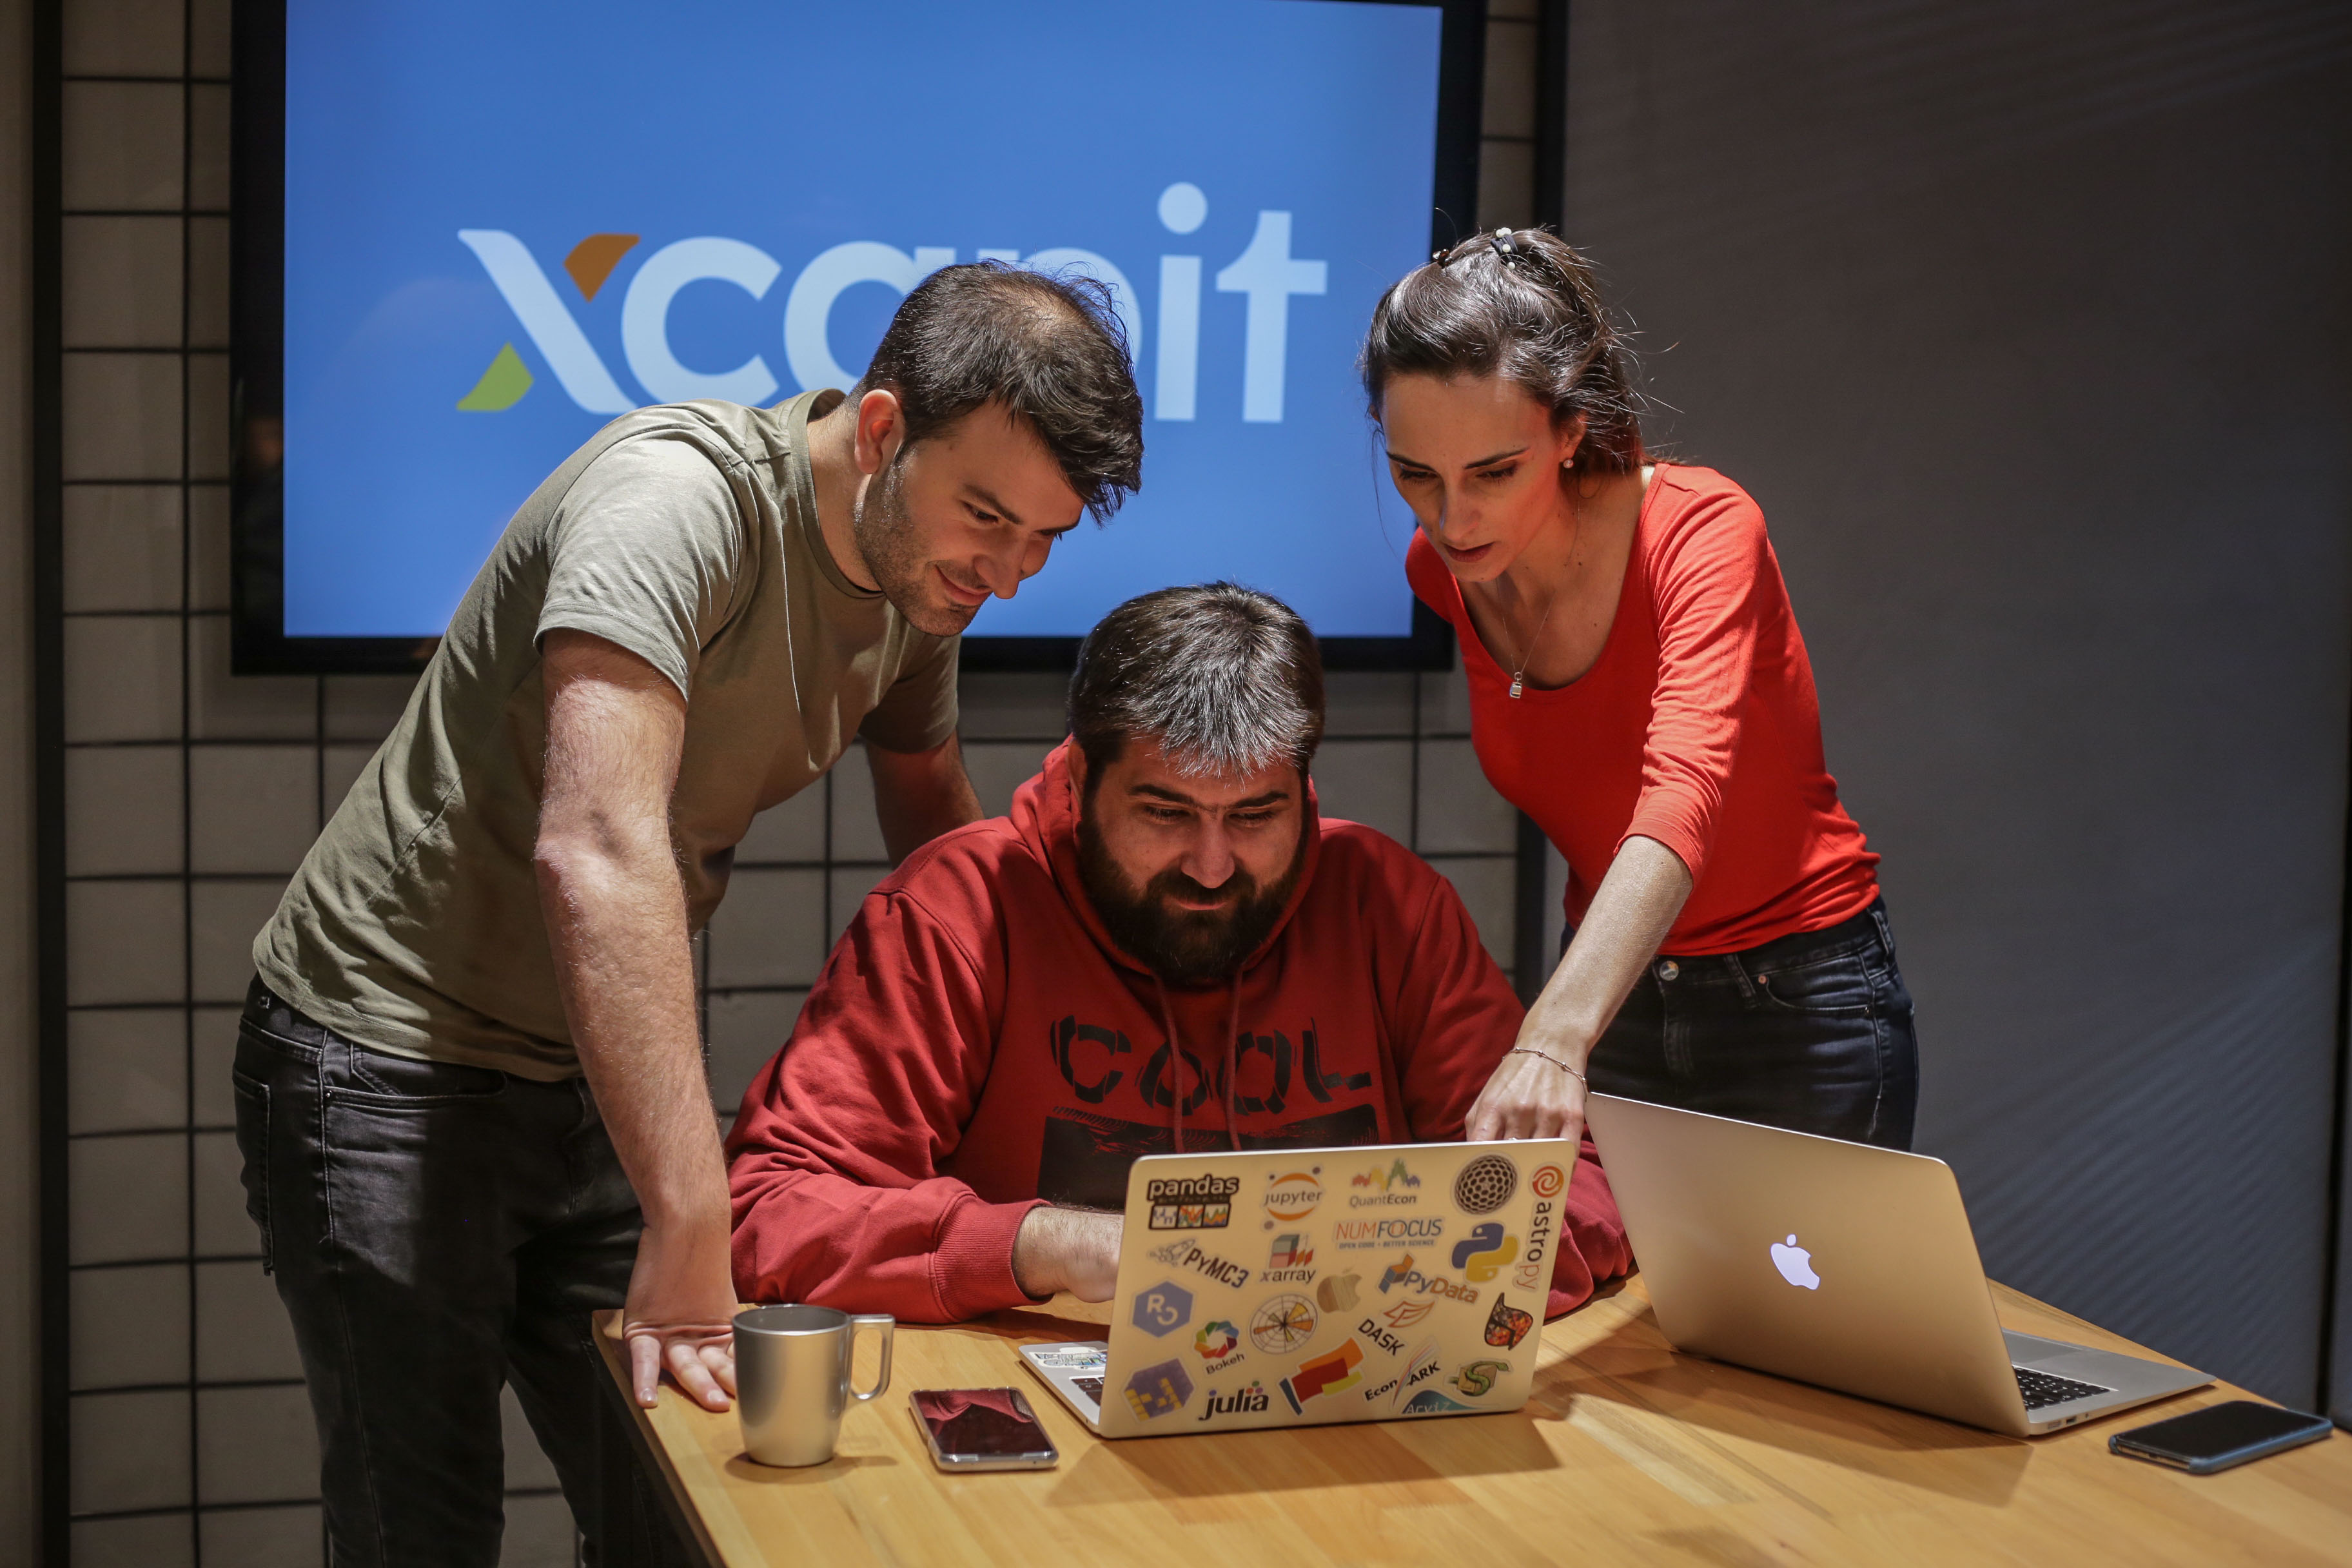 Team xcapit at a meeting 